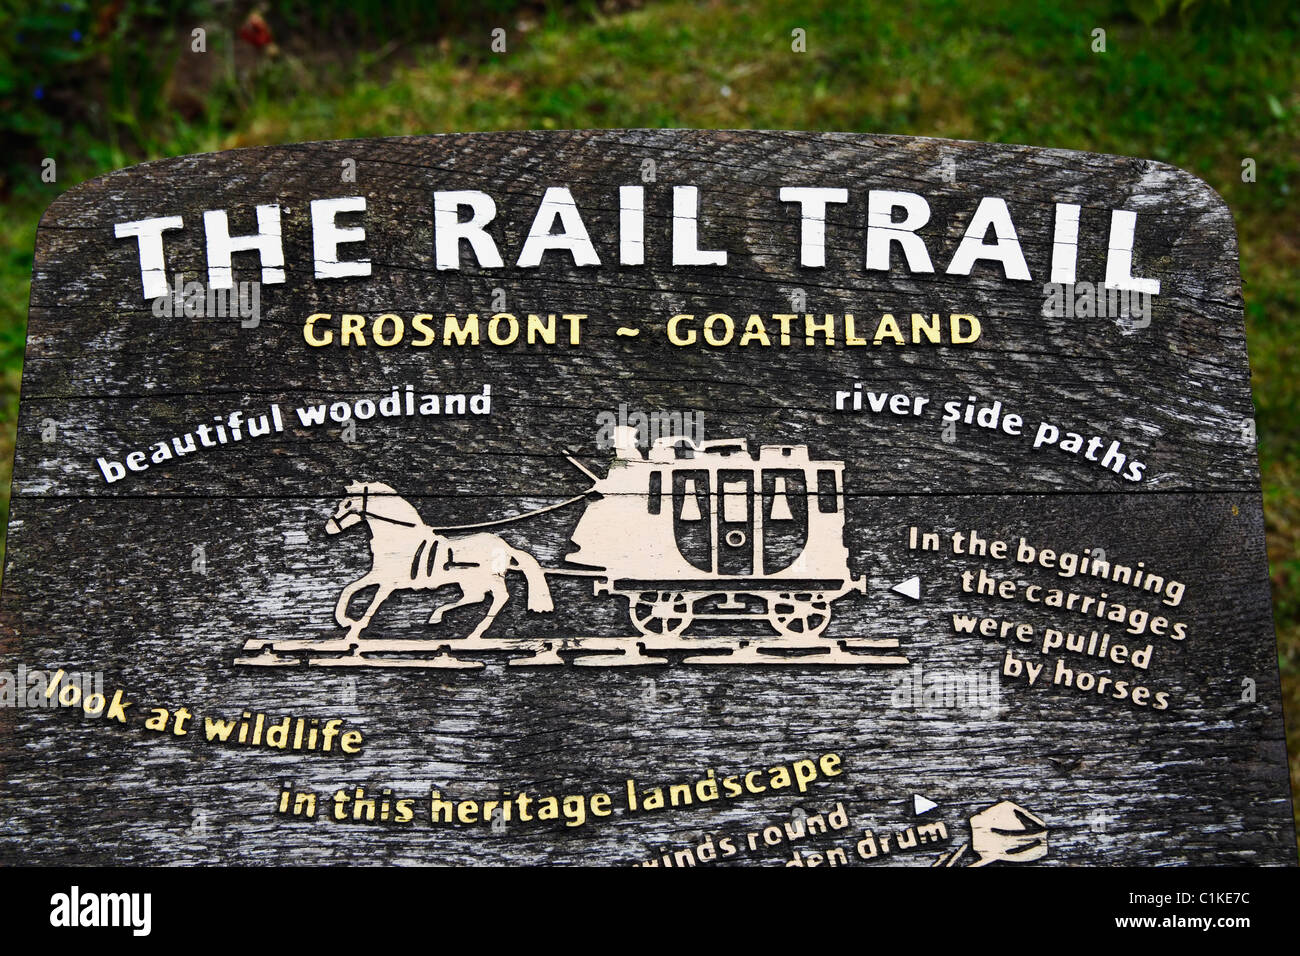 The Rail Trail footpath sign alongside track between Grosmont and Goathland, North Yorkshire, England. Stock Photo